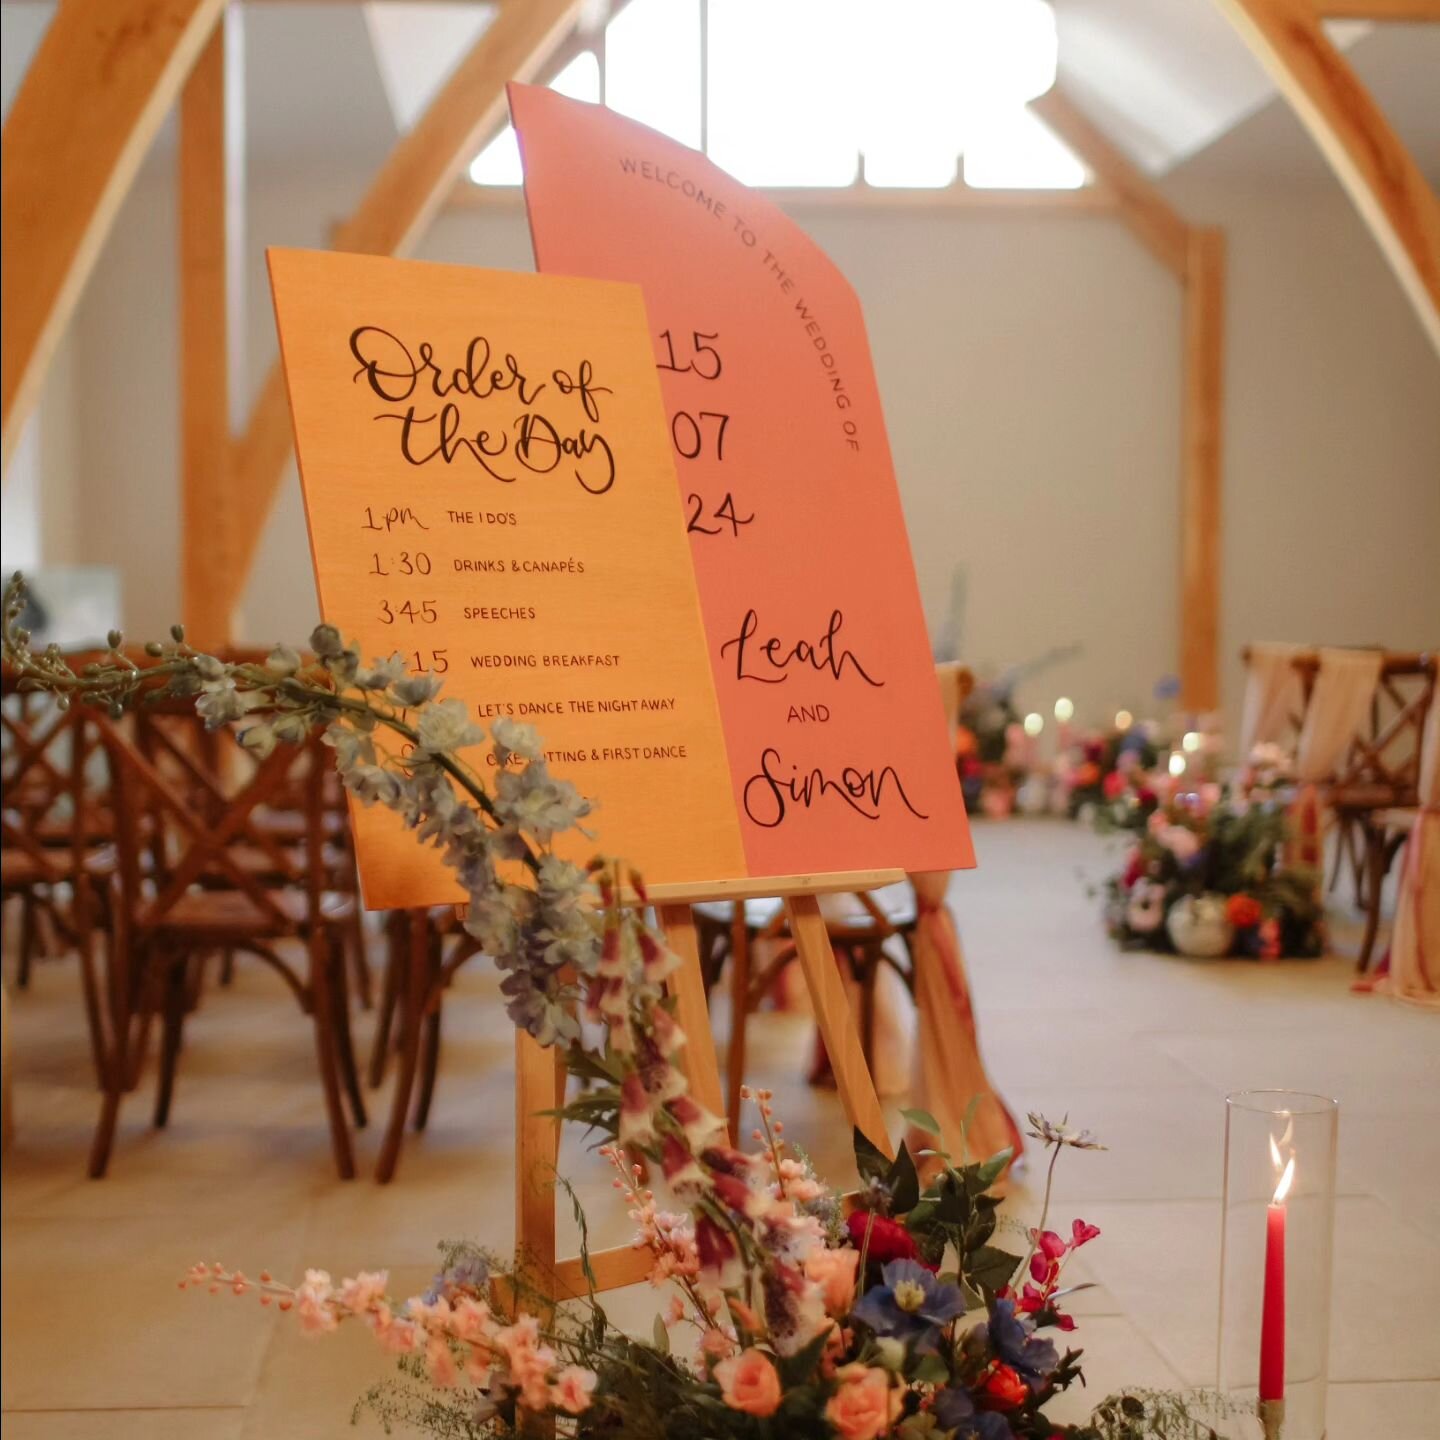 ~ Pinks &amp; Oranges ~ being bold is in for 2024, along with duo signs! The pinks and oranges stood out beautifully against the neutral style of @horningtonmanor, along with the gorgeous floral display created by @shindig.event.styling.

Thankyou @a